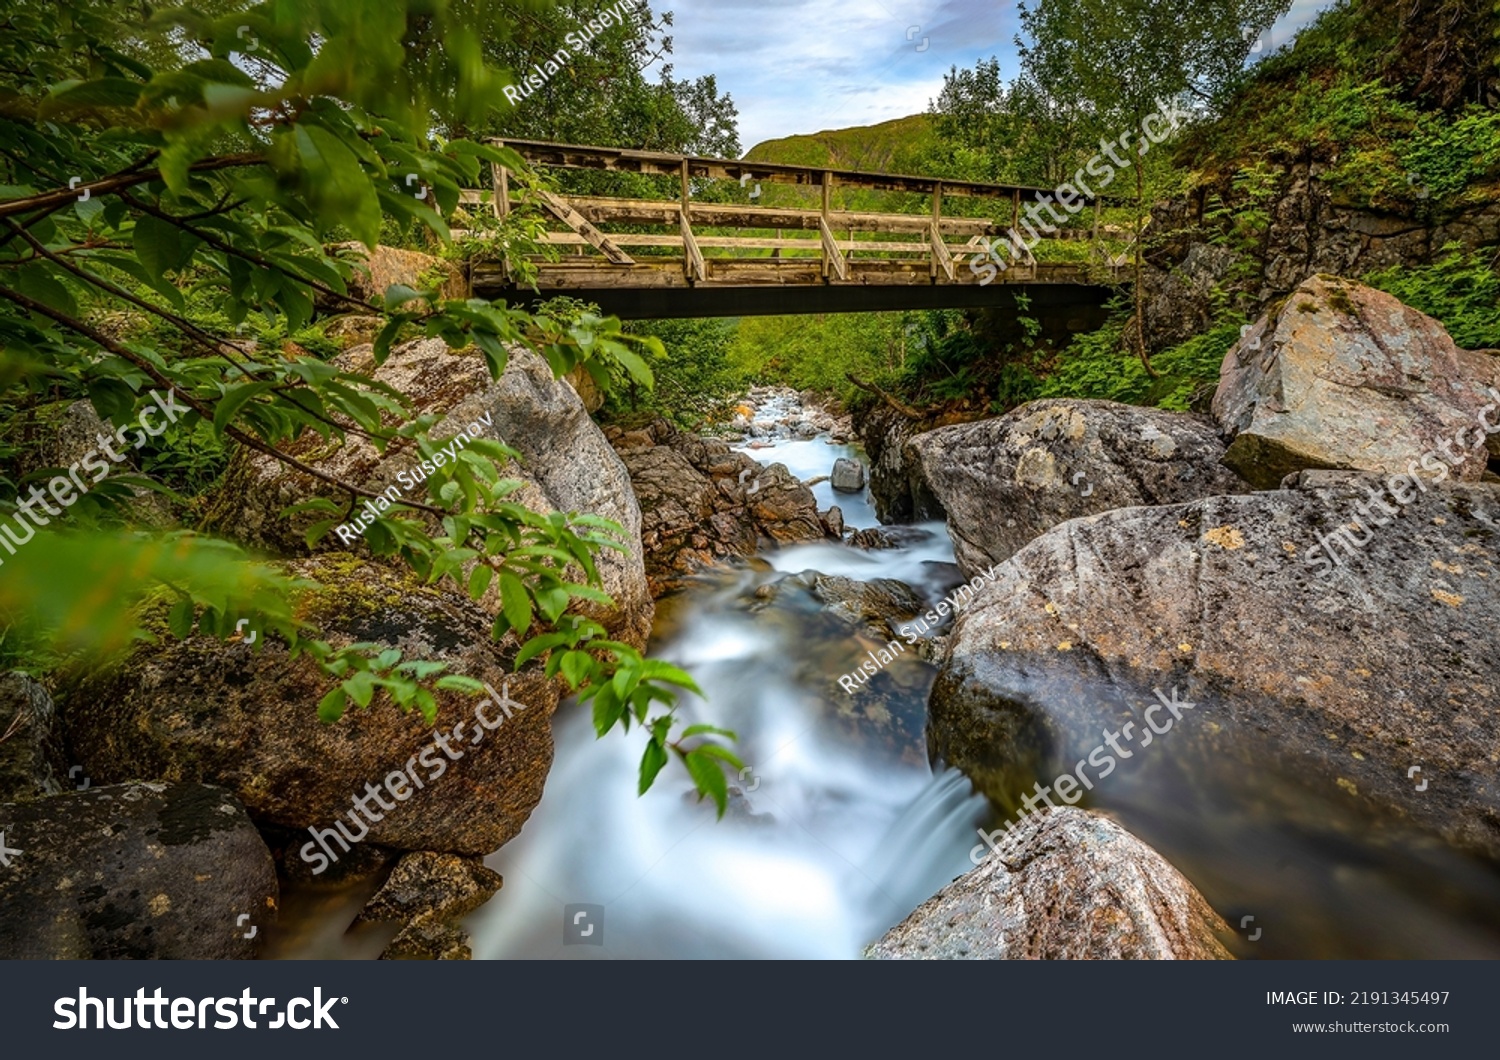 Wooden bridge over the forest river. River bridge. Bridge over river rocks. River bridge view #2191345497